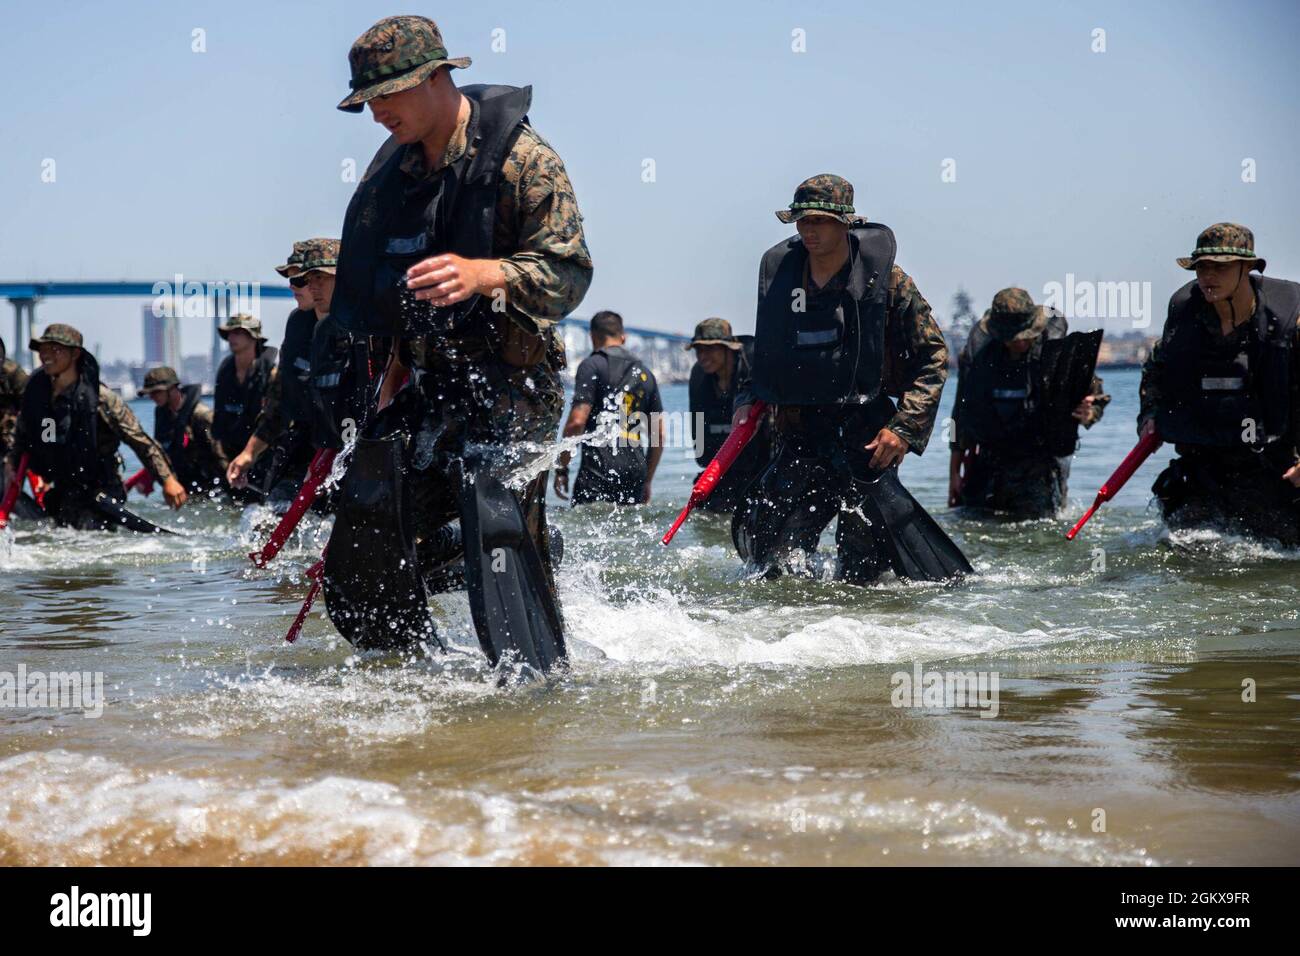 U.S. Marines with Co. C, 1st Battalion, 5th Marine Regiment, 1st Marine Division, make their way to shore after executing rescue drills during a Scout Swimmer Course on Naval Amphibious Base Coronado, California, July 16, 2021. The Marines learned the skills necessary to plan and execute swimmer reconnaissance for a small boat raid company in preparation for deployment. Stock Photo